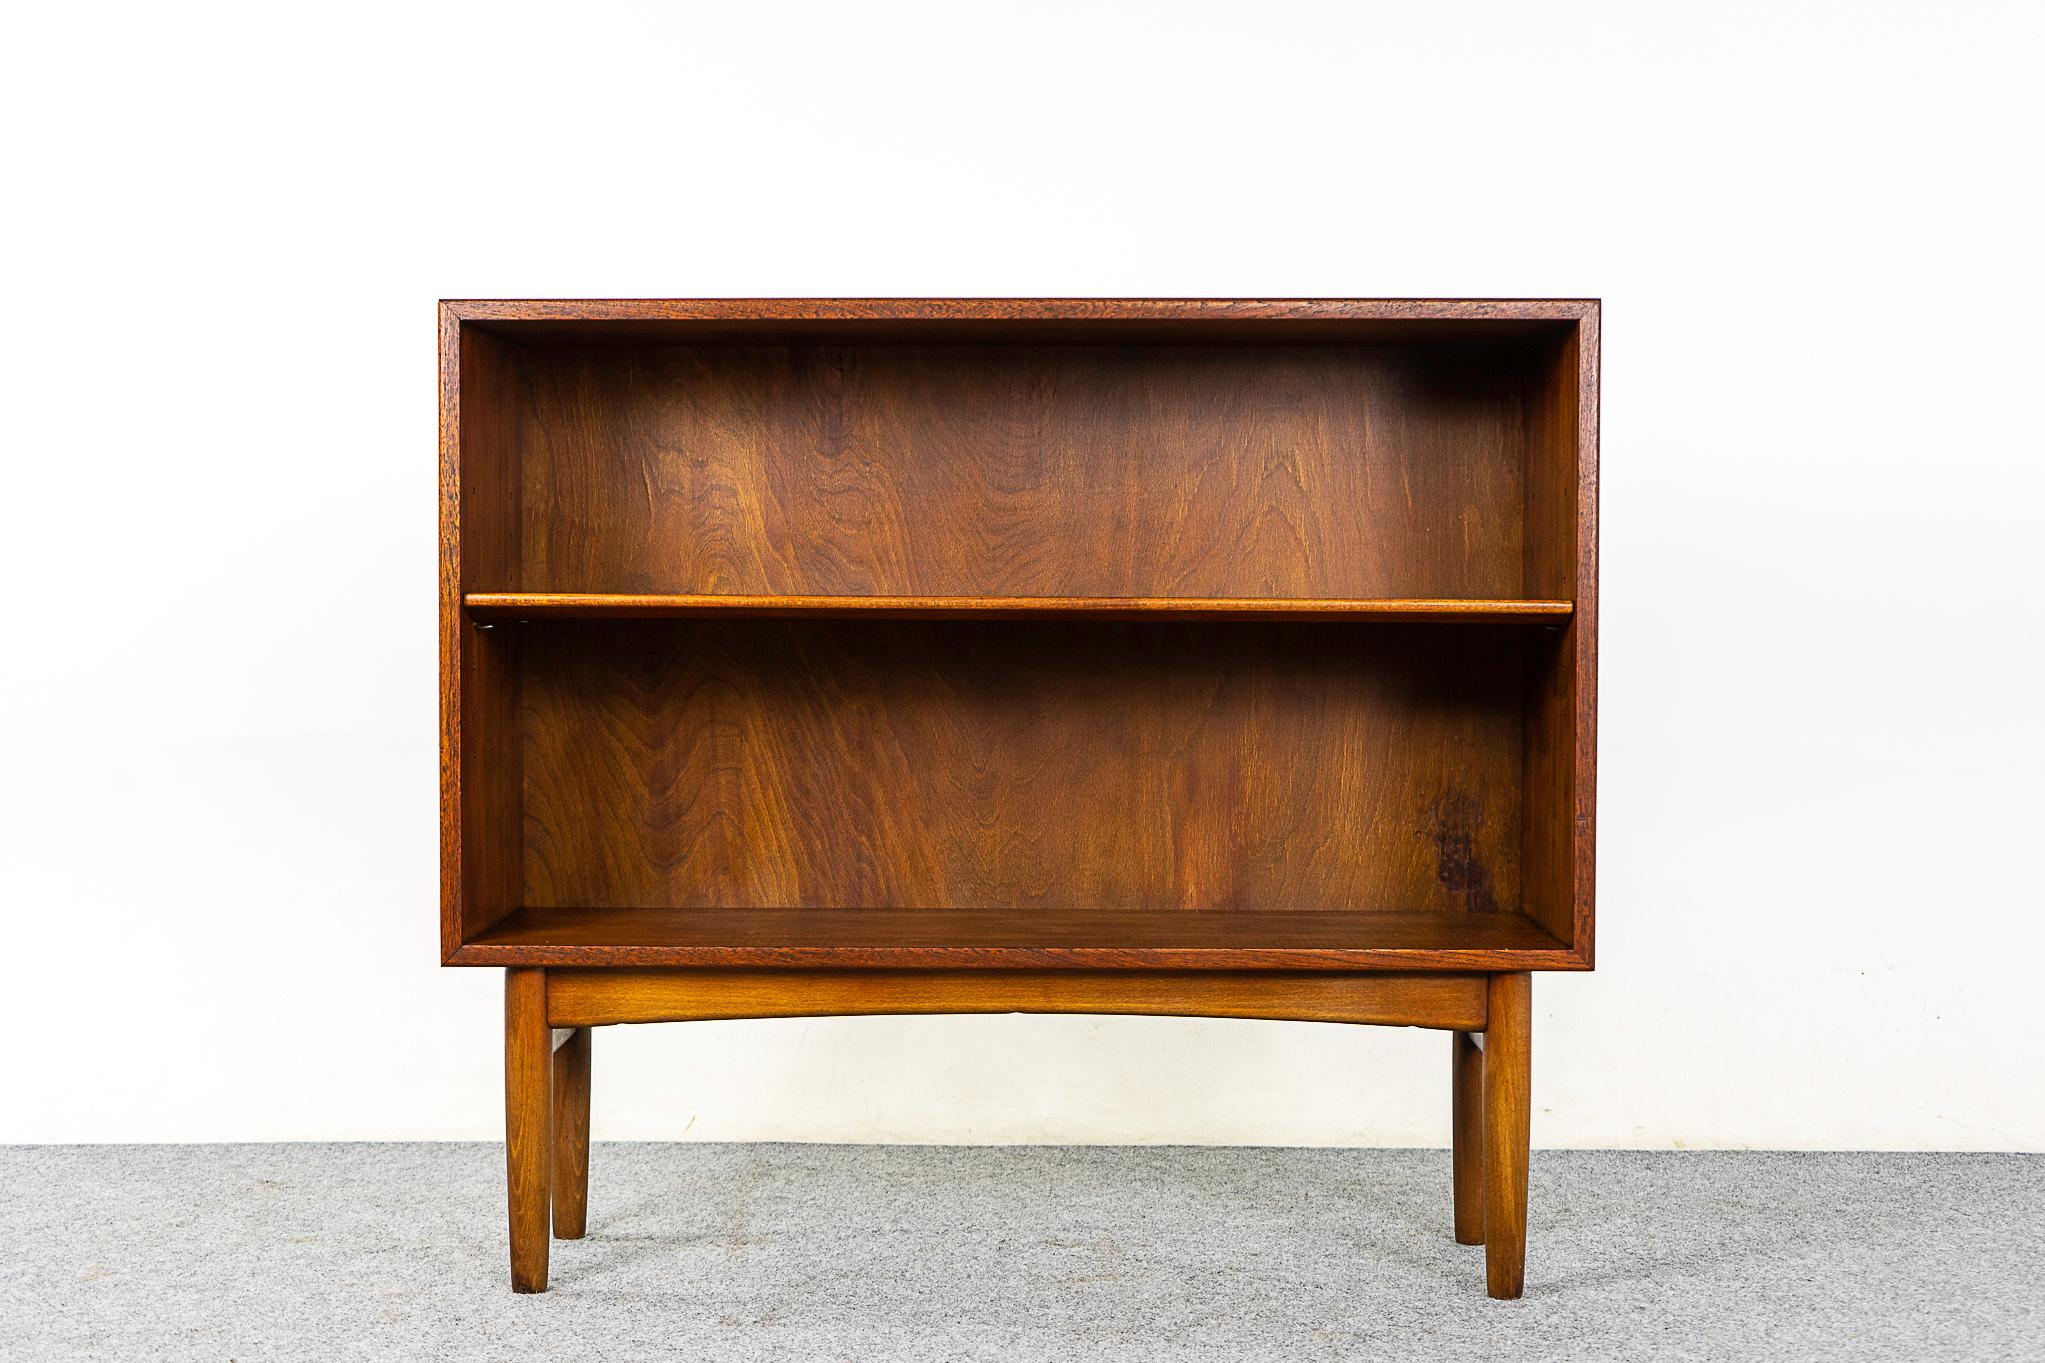 Danish Mid Century teak & beech bookcase, circa 1960's. This low profile open bookcase offers removable and adjustable shelving, removable legs and the compact design makes it the perfect condo sized storage solution.

Back panel of bookcase shows